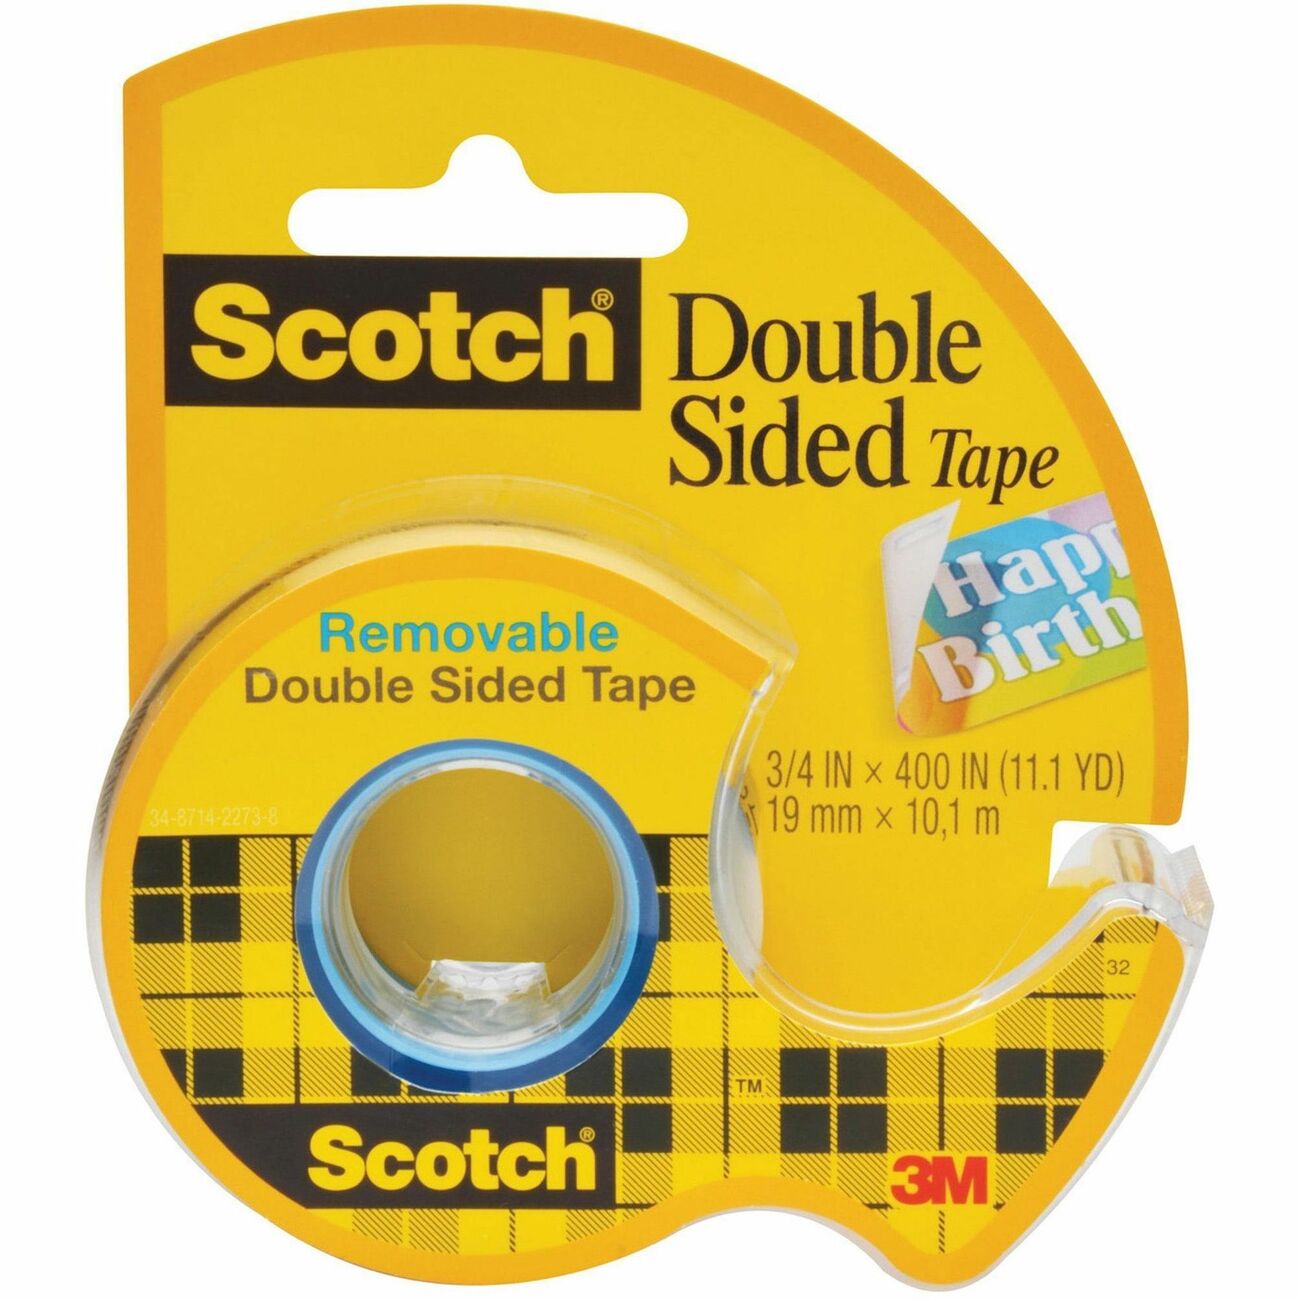 Scotch® Crystal Clear Tape, 19 mm x 7.5 m, 2 Rolls on Handheld Dispenser +  1 FREE/Pack